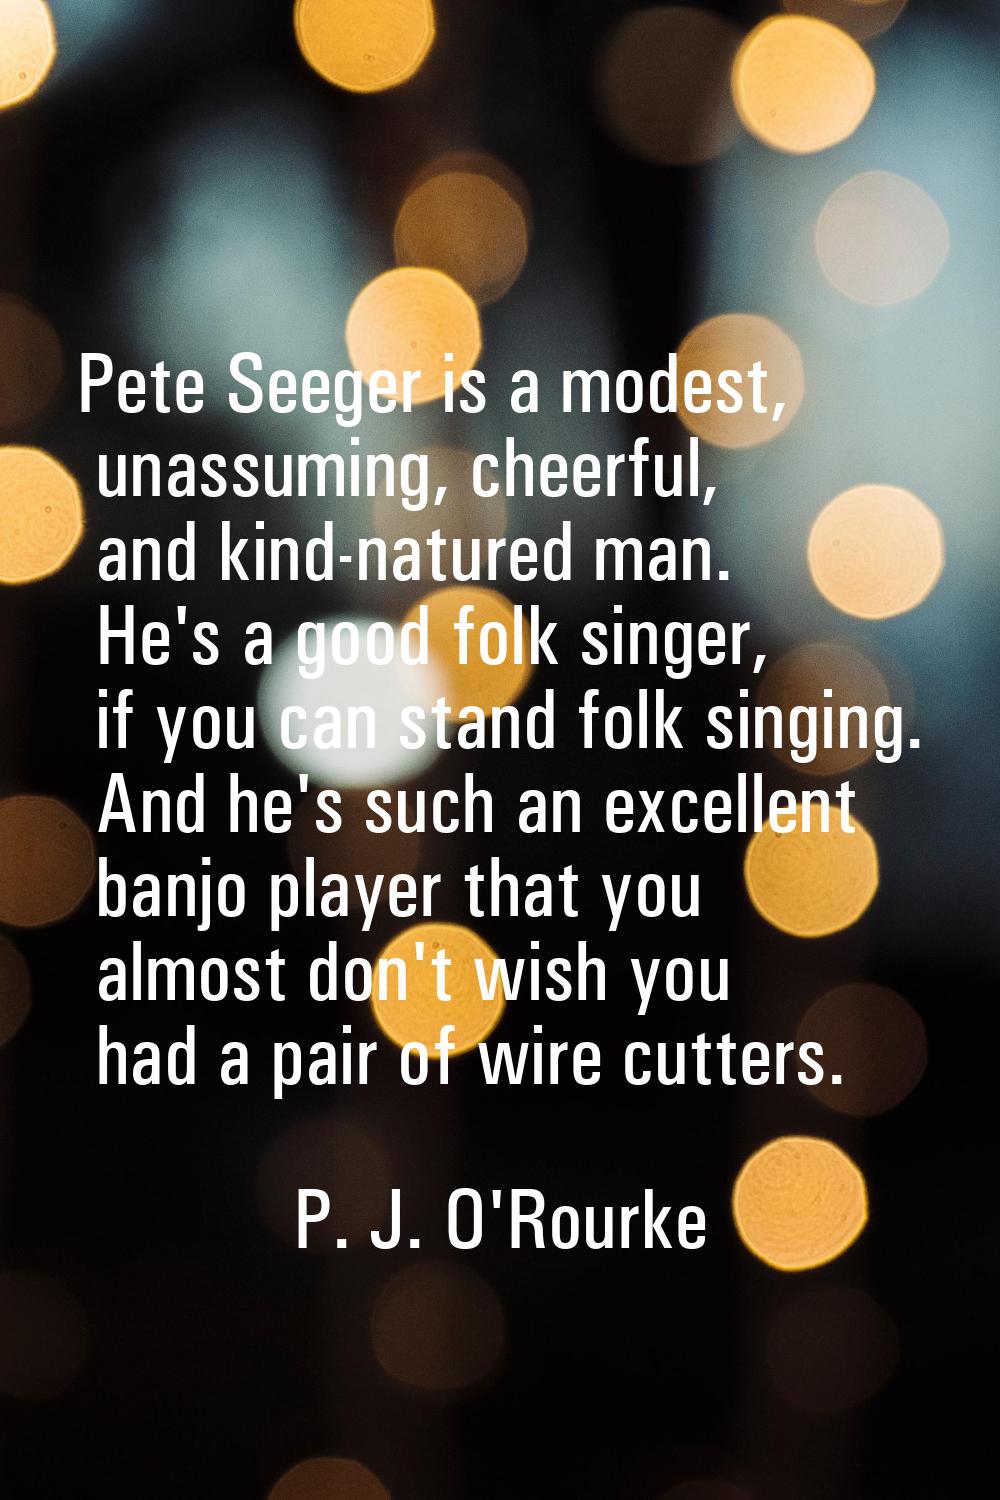 Pete Seeger is a modest, unassuming, cheerful, and kind-natured man. He's a good folk singer, if yo